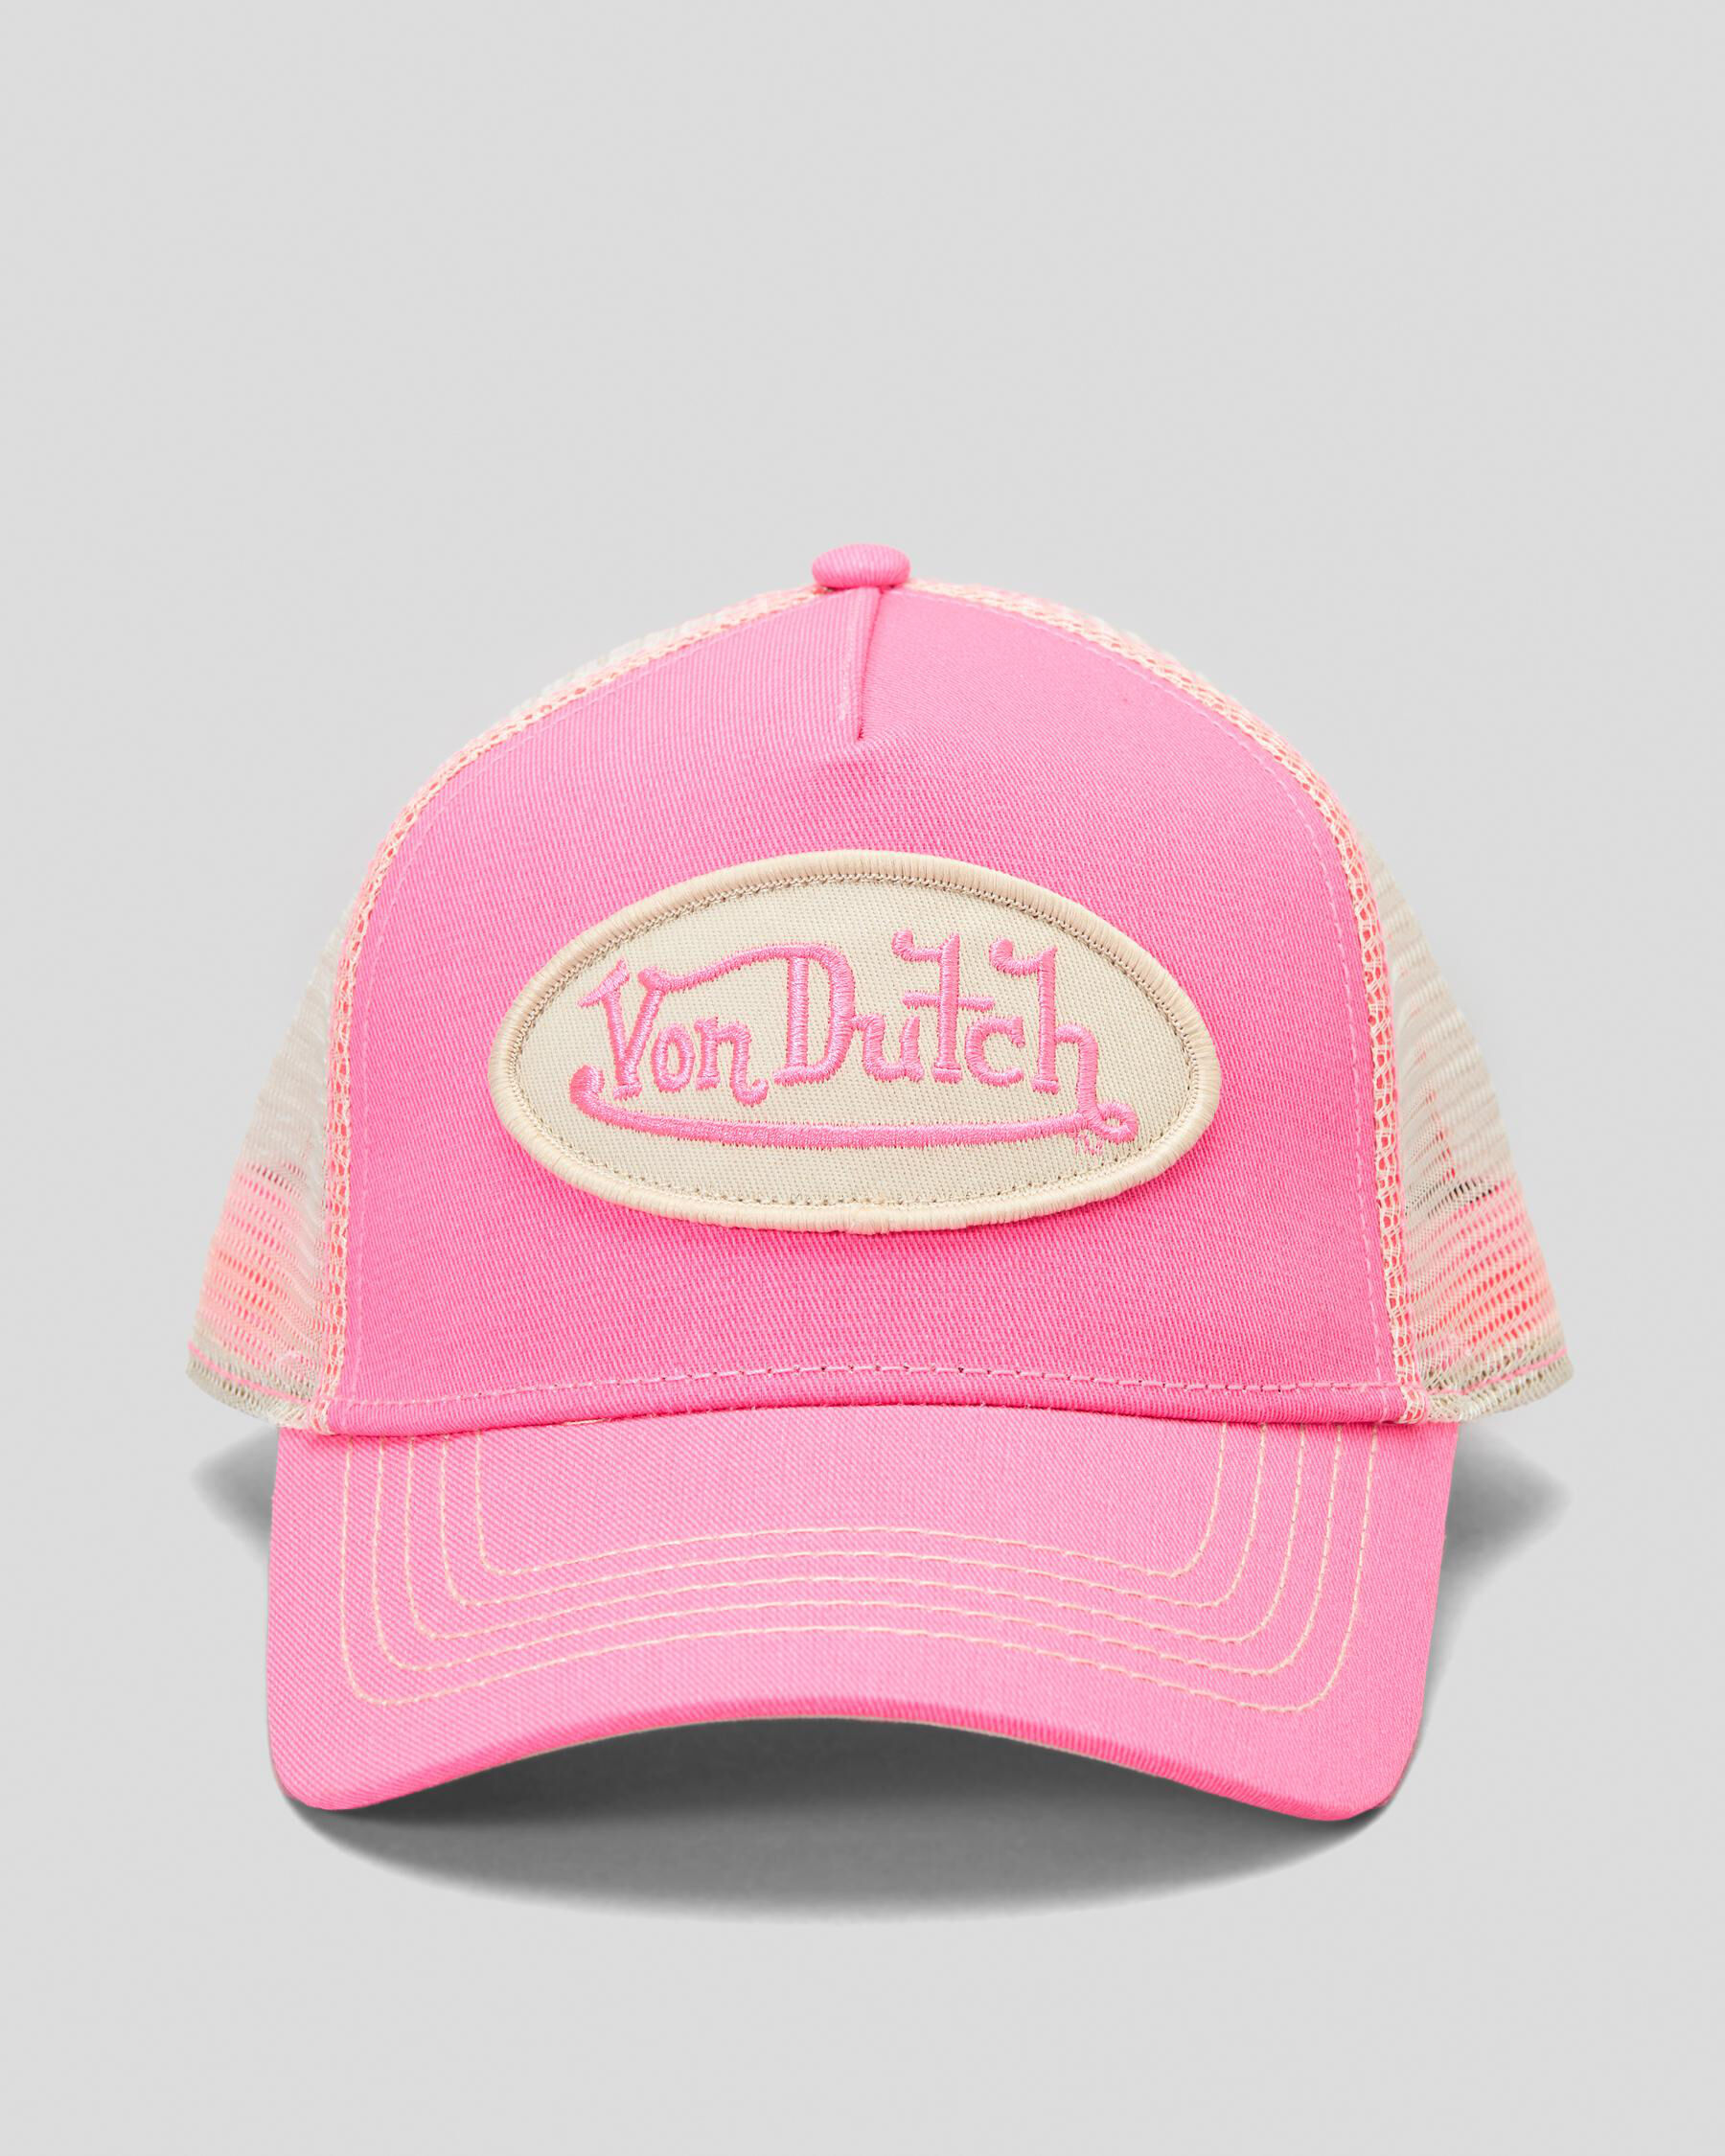 Shop Womens Caps Online - FREE* Shipping and Easy Returns